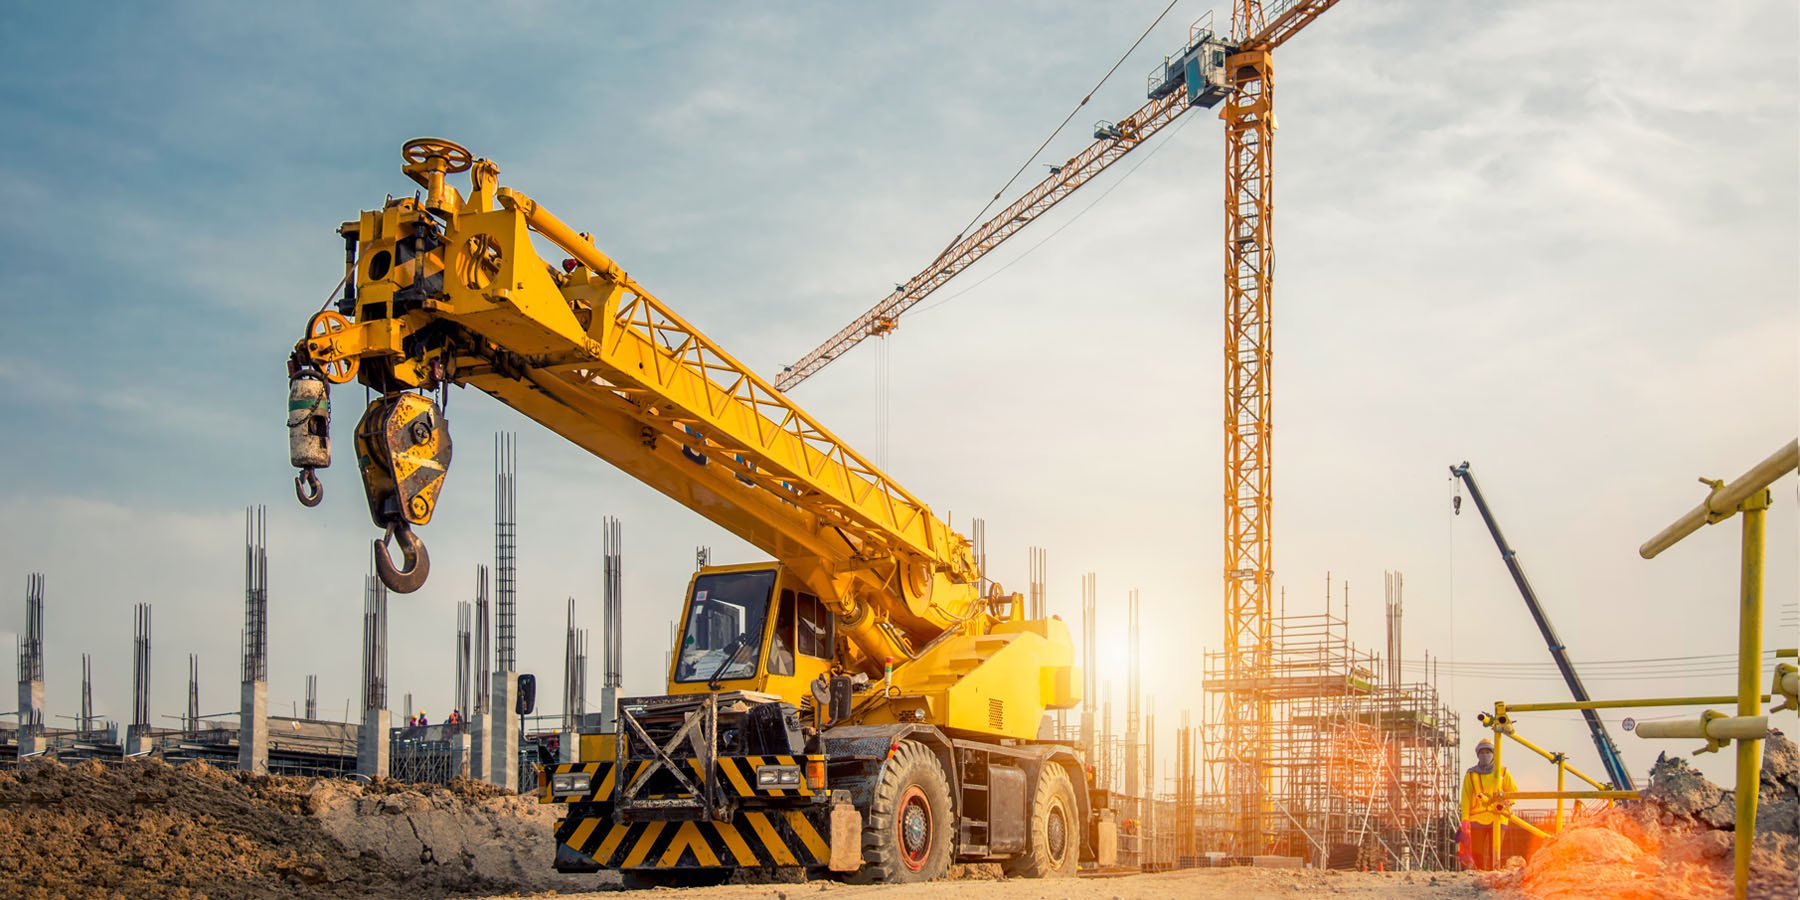 A rugged yellow mobile crane in front of a building construction site with a yellow tower crane in the background and workers on site in hi-visibility jackets